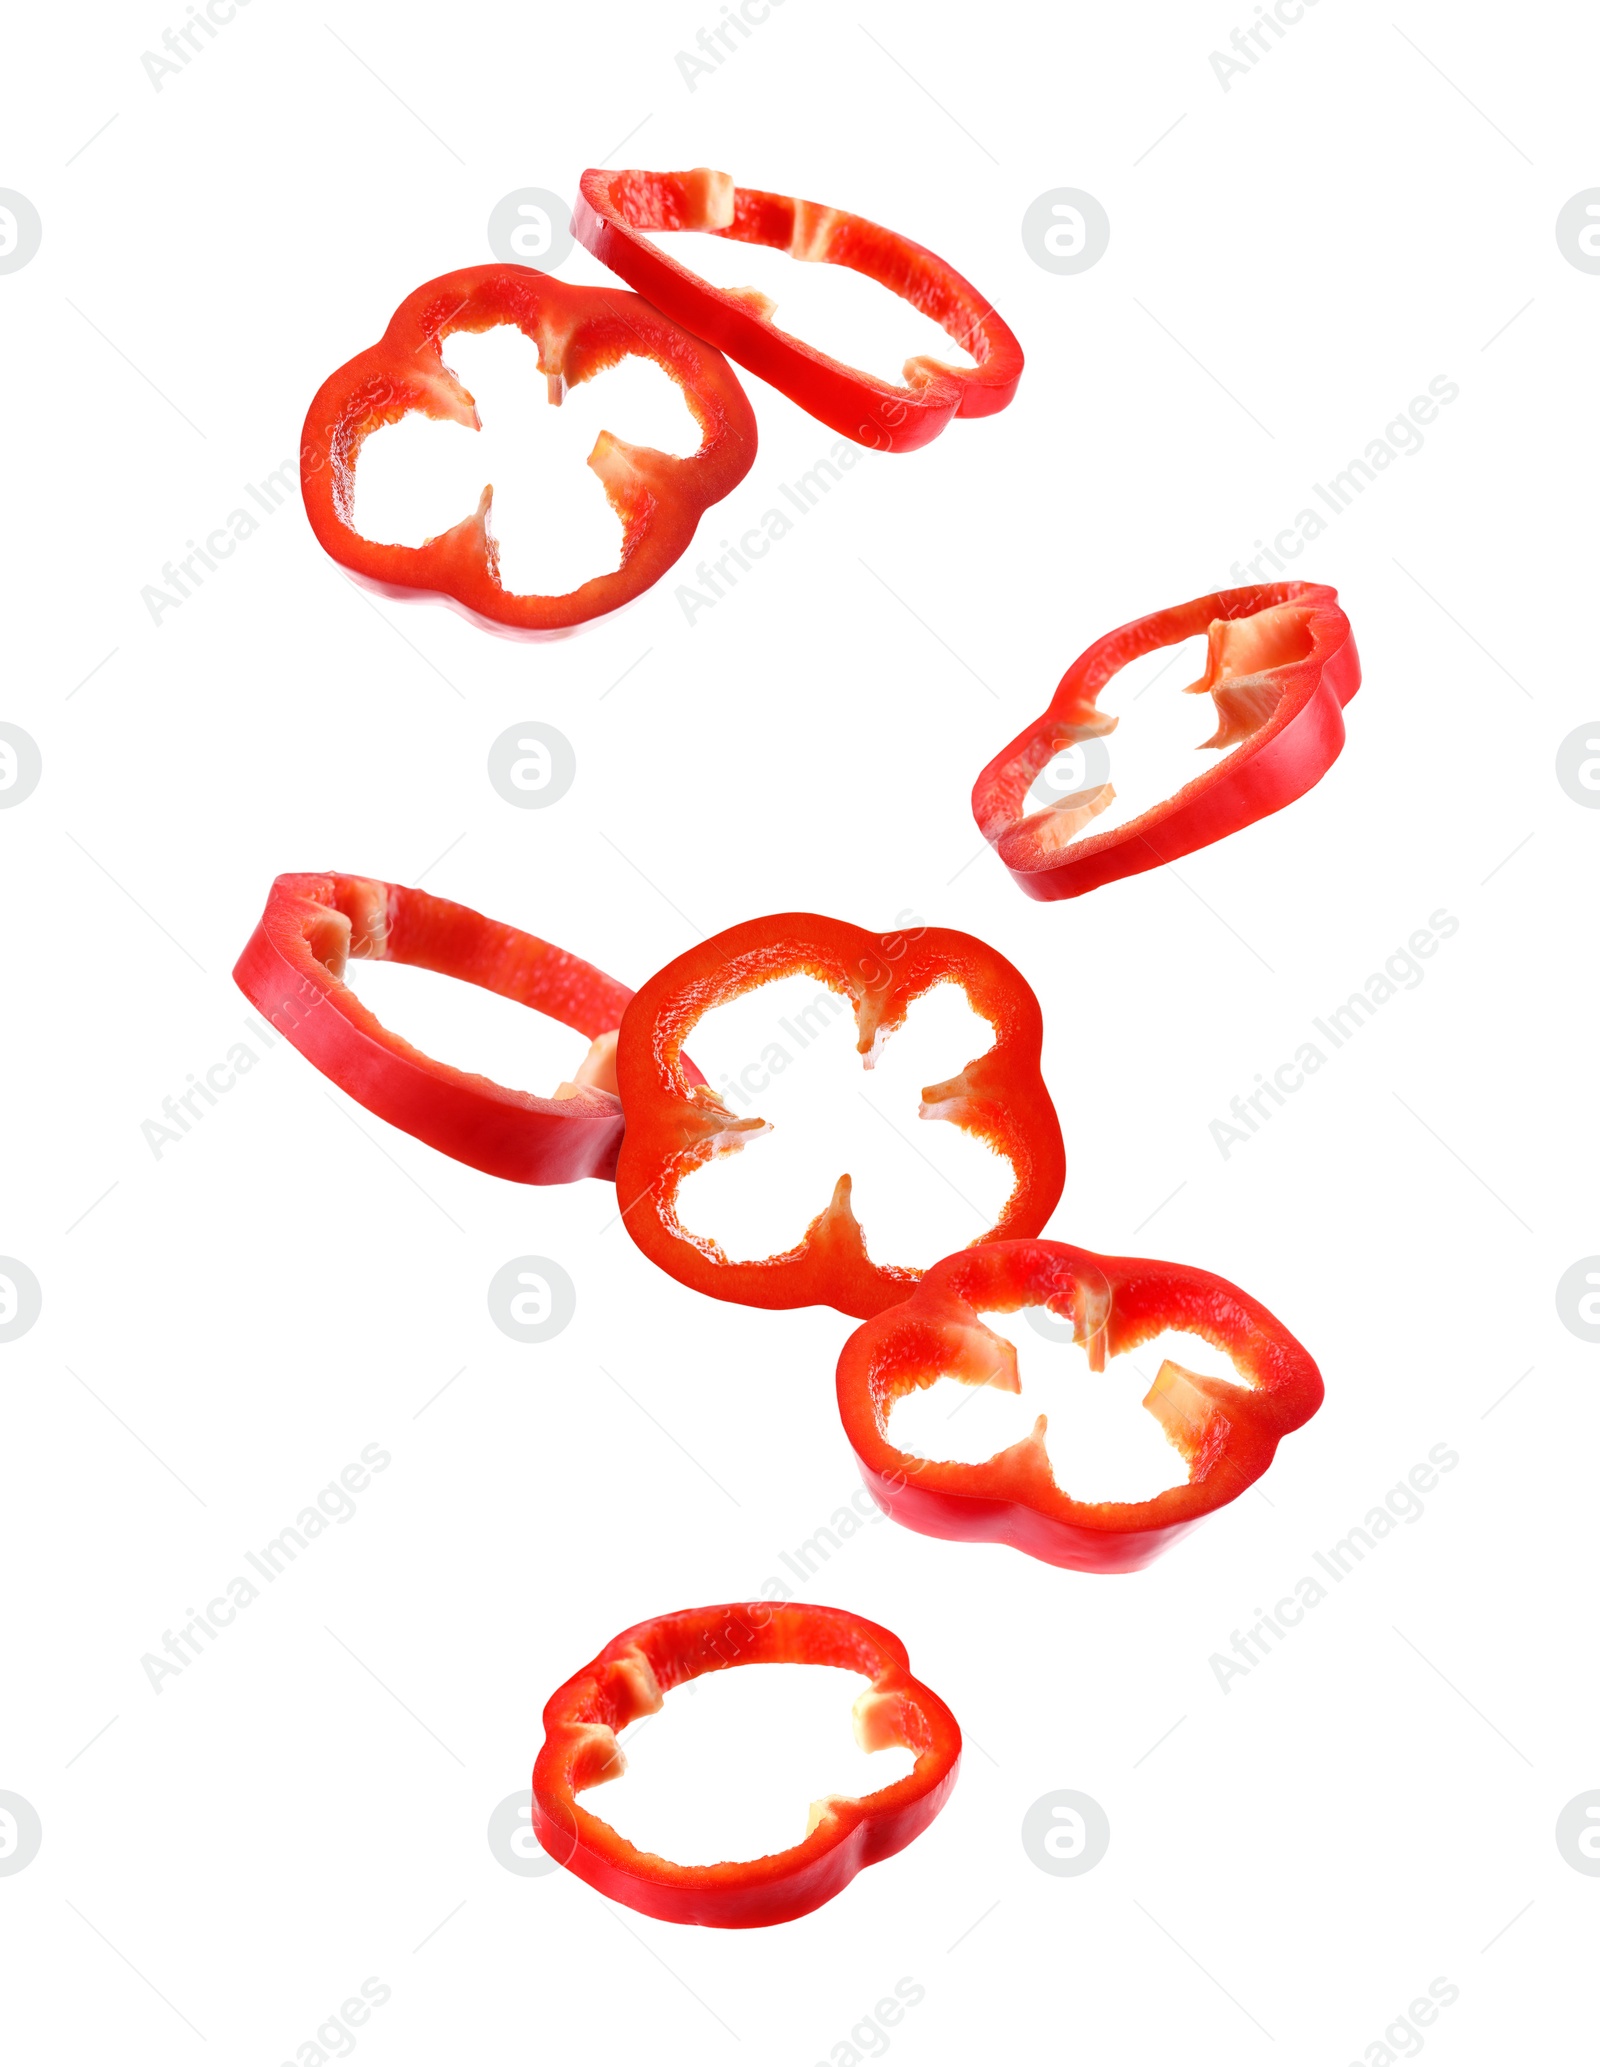 Image of Falling cut red bell peppers on white background